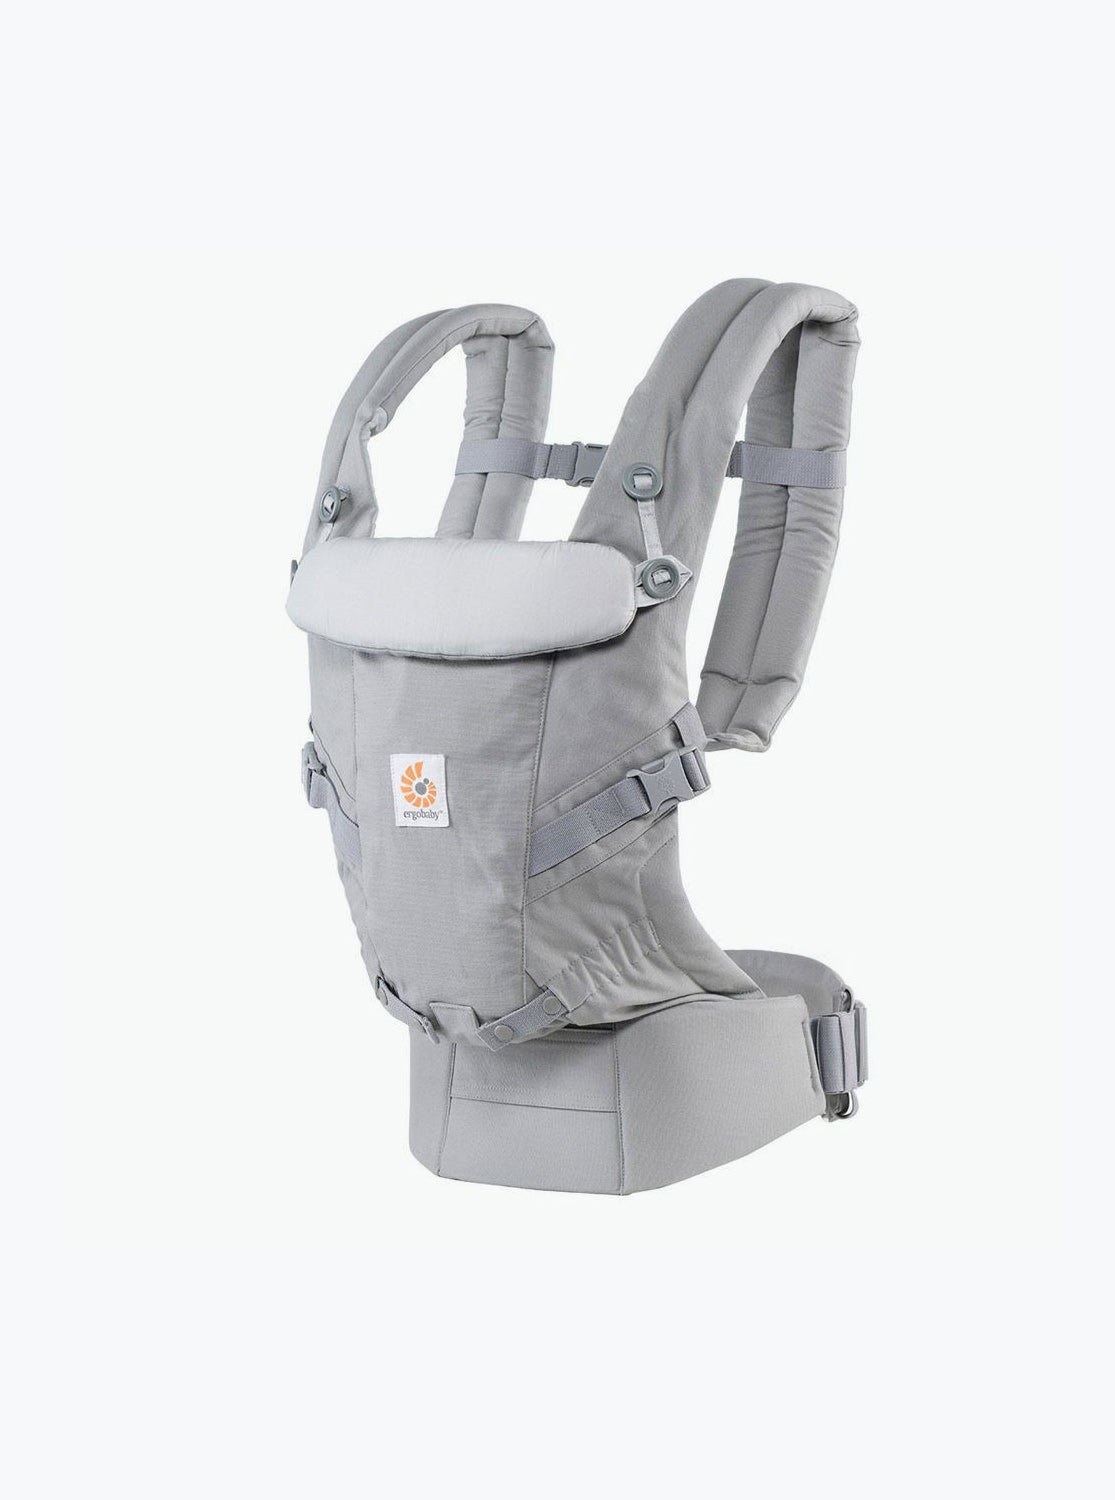 ERGOBABY Adapt Baby Carrier - ANB Baby -Baby Carrier